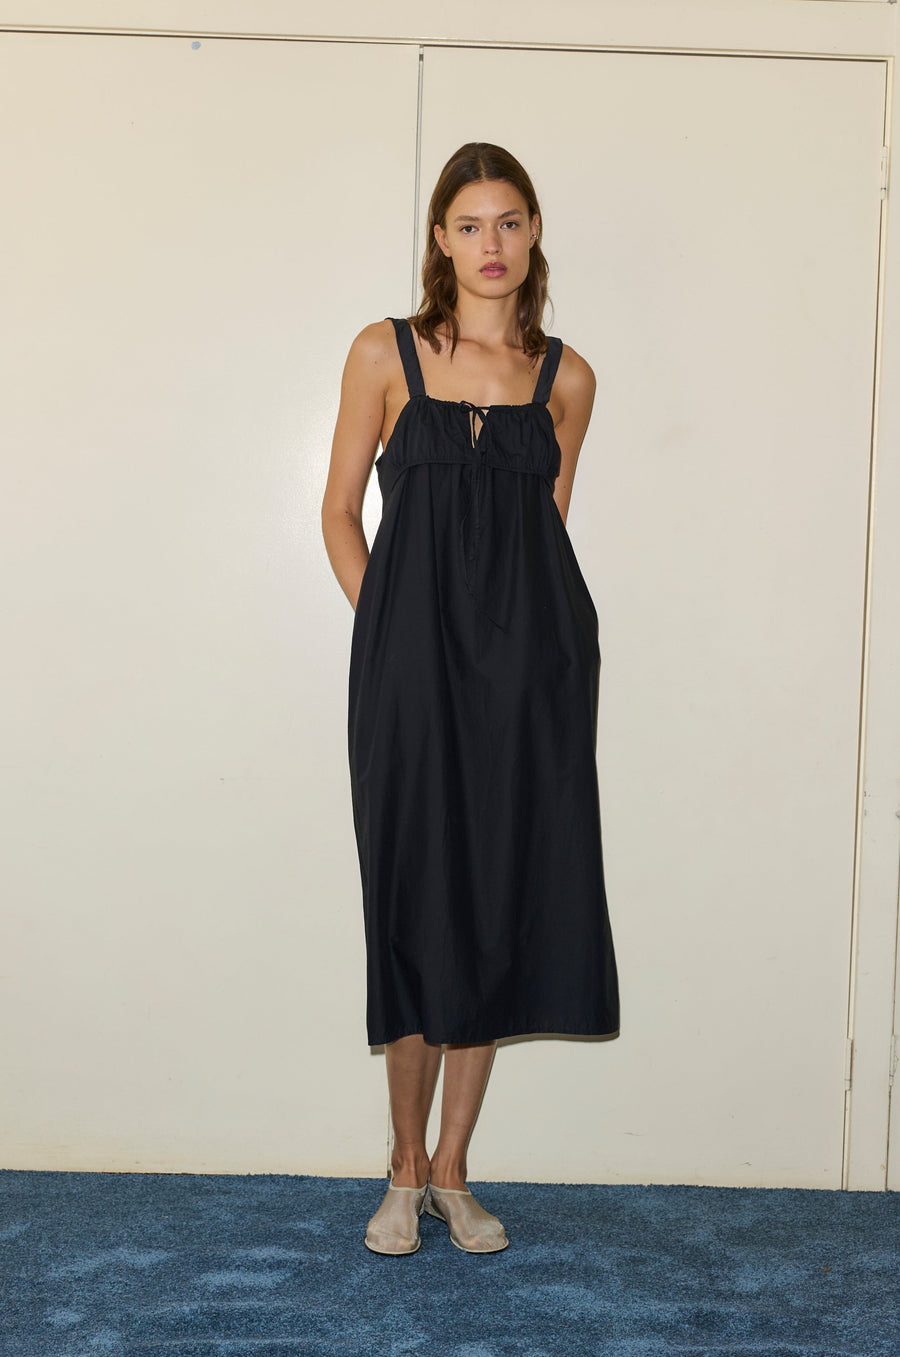 The Ruched Tie Dress - Black